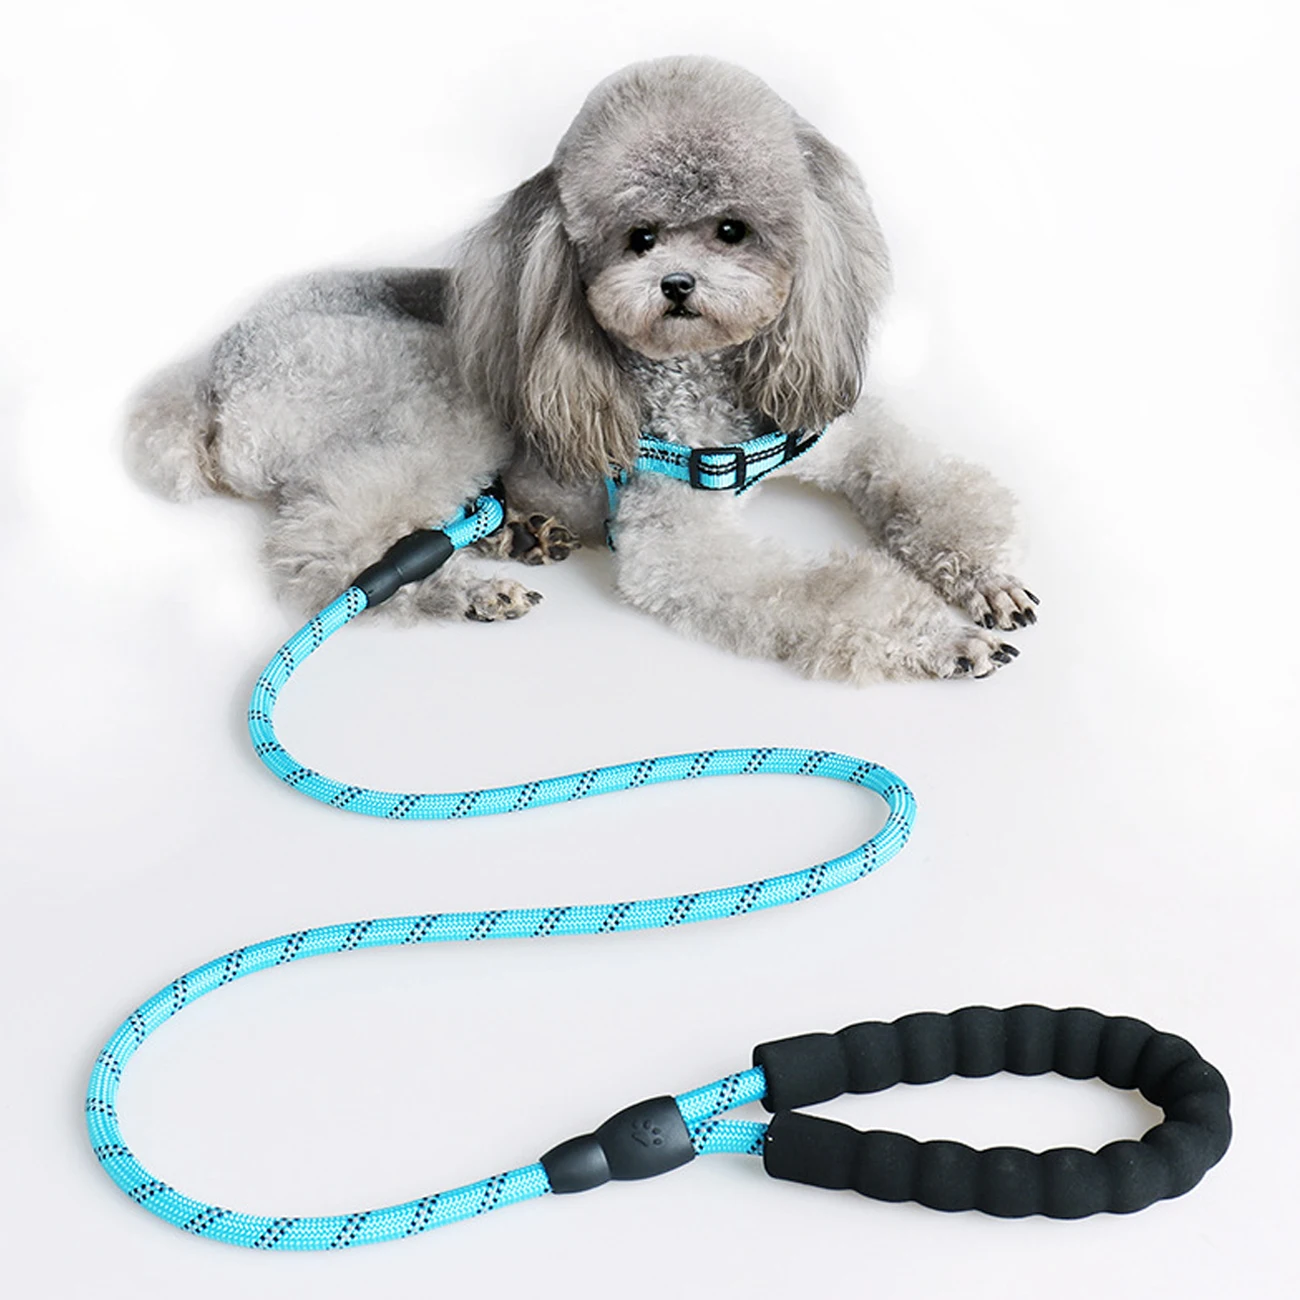 

5 FT Rope Polyester Braided Dog Training Leash Mountain Climbing Reflective Dog Leash for Large Medium Small Dogs Walking Leads, Customized color